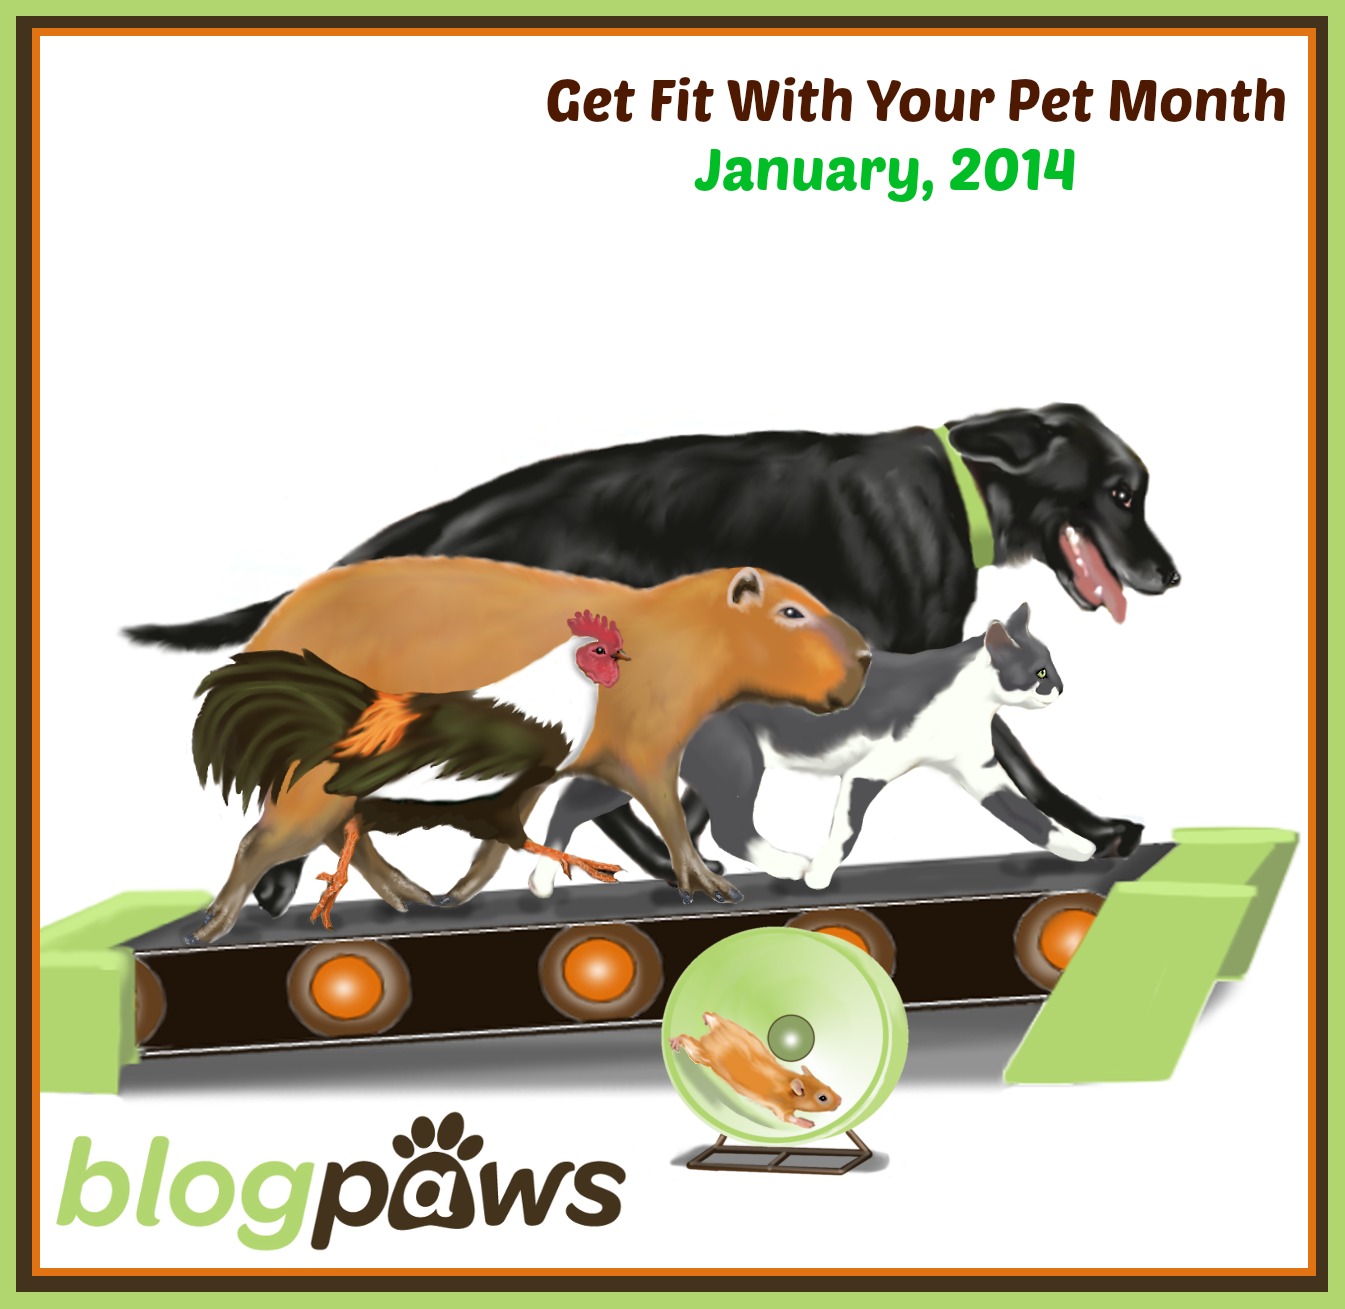 Get Fit with Your Pet Month Blog Hop